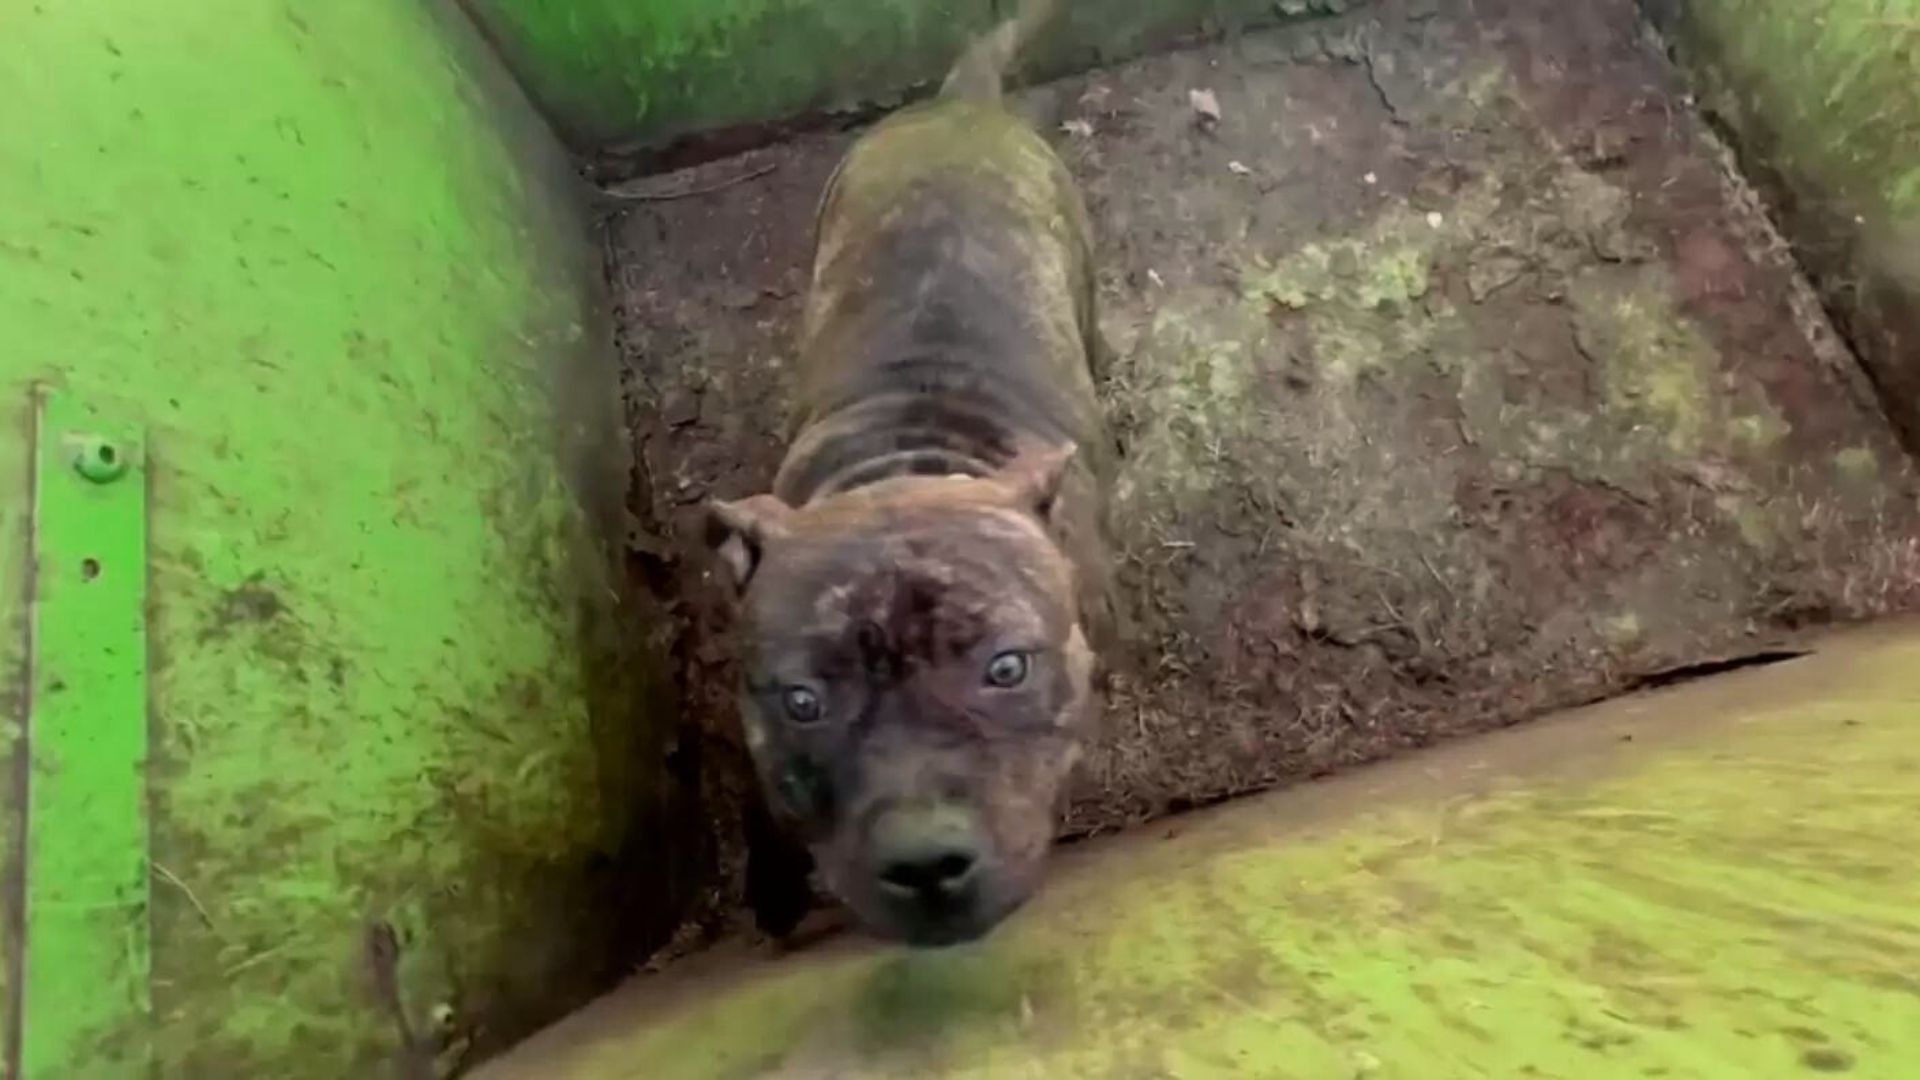 Rescuers Open A Dumpster Lid And Discover The Most Adorable Eyes Looking Back At Them